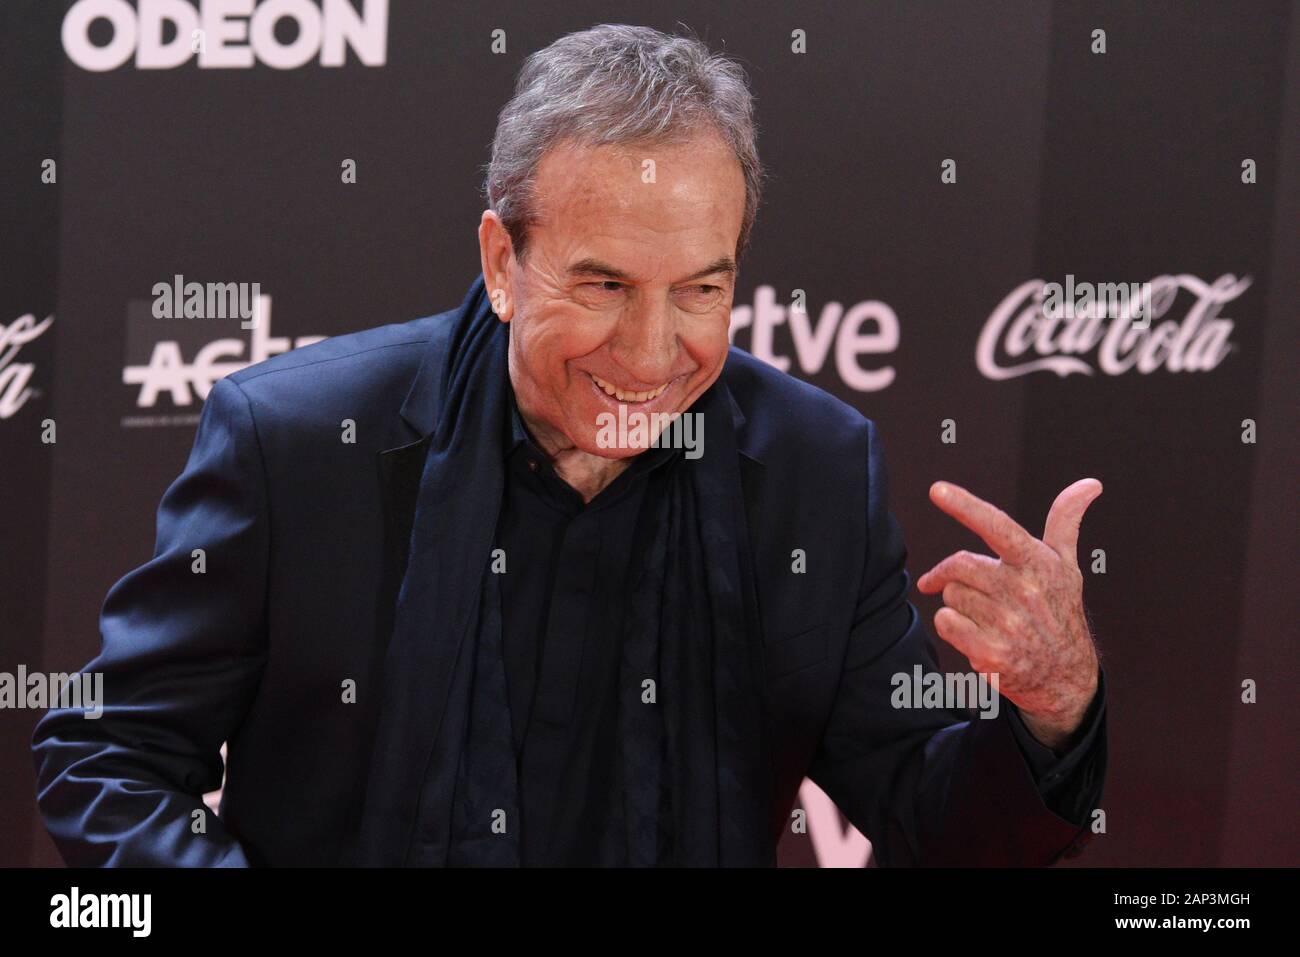 Spanish singer Jose Luis Perales attends a photocall prior to the Odeon Music Awards gala at the Royal Theater in Madrid. Stock Photo